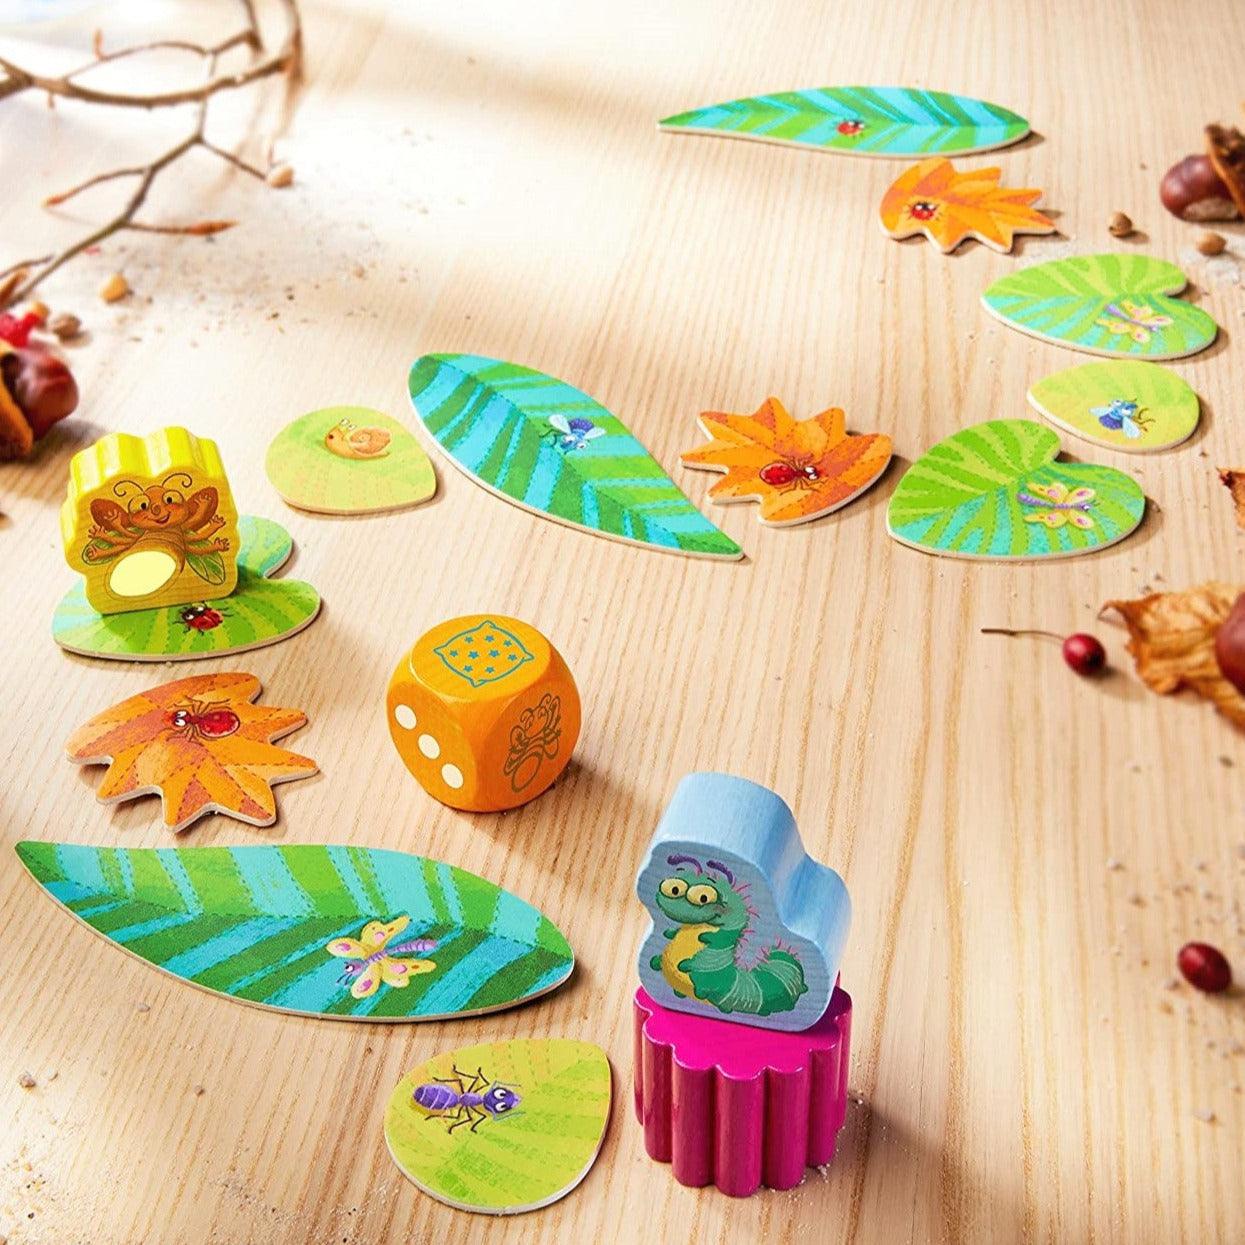 Haba: my first game Glowing Worms